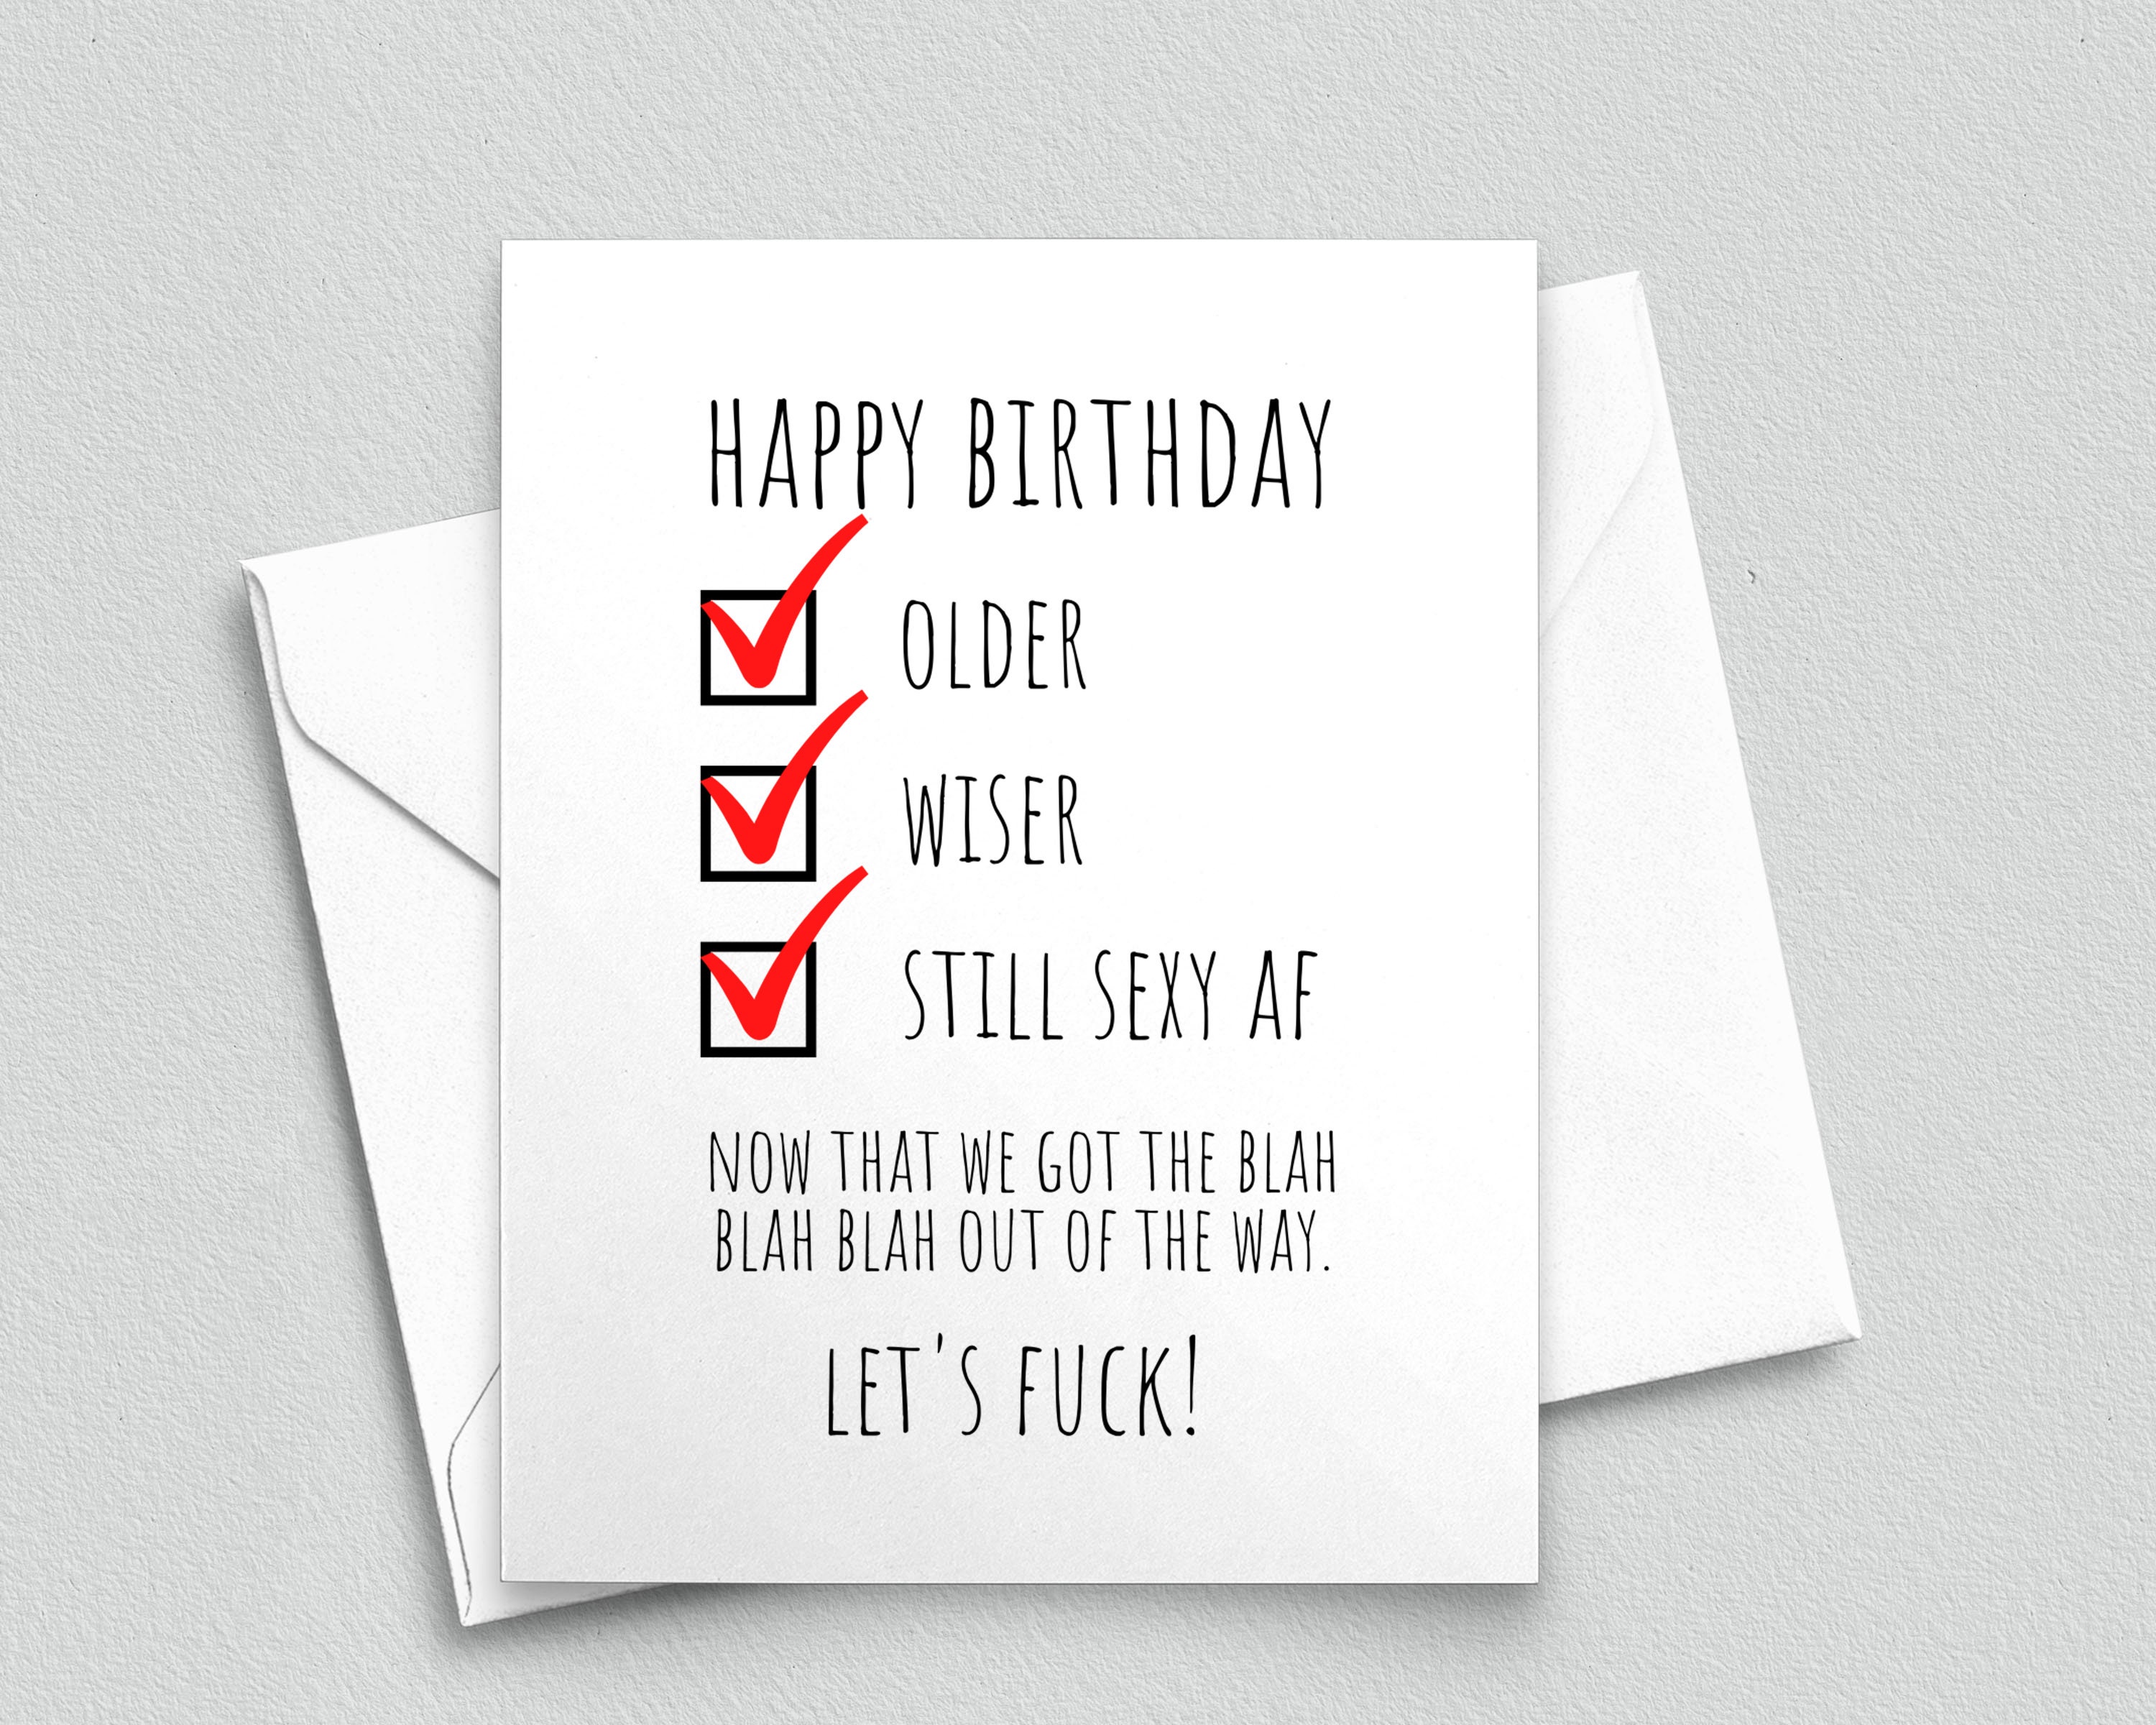 Still Sexy AF Lets Fuck Birthday Card for Your pic